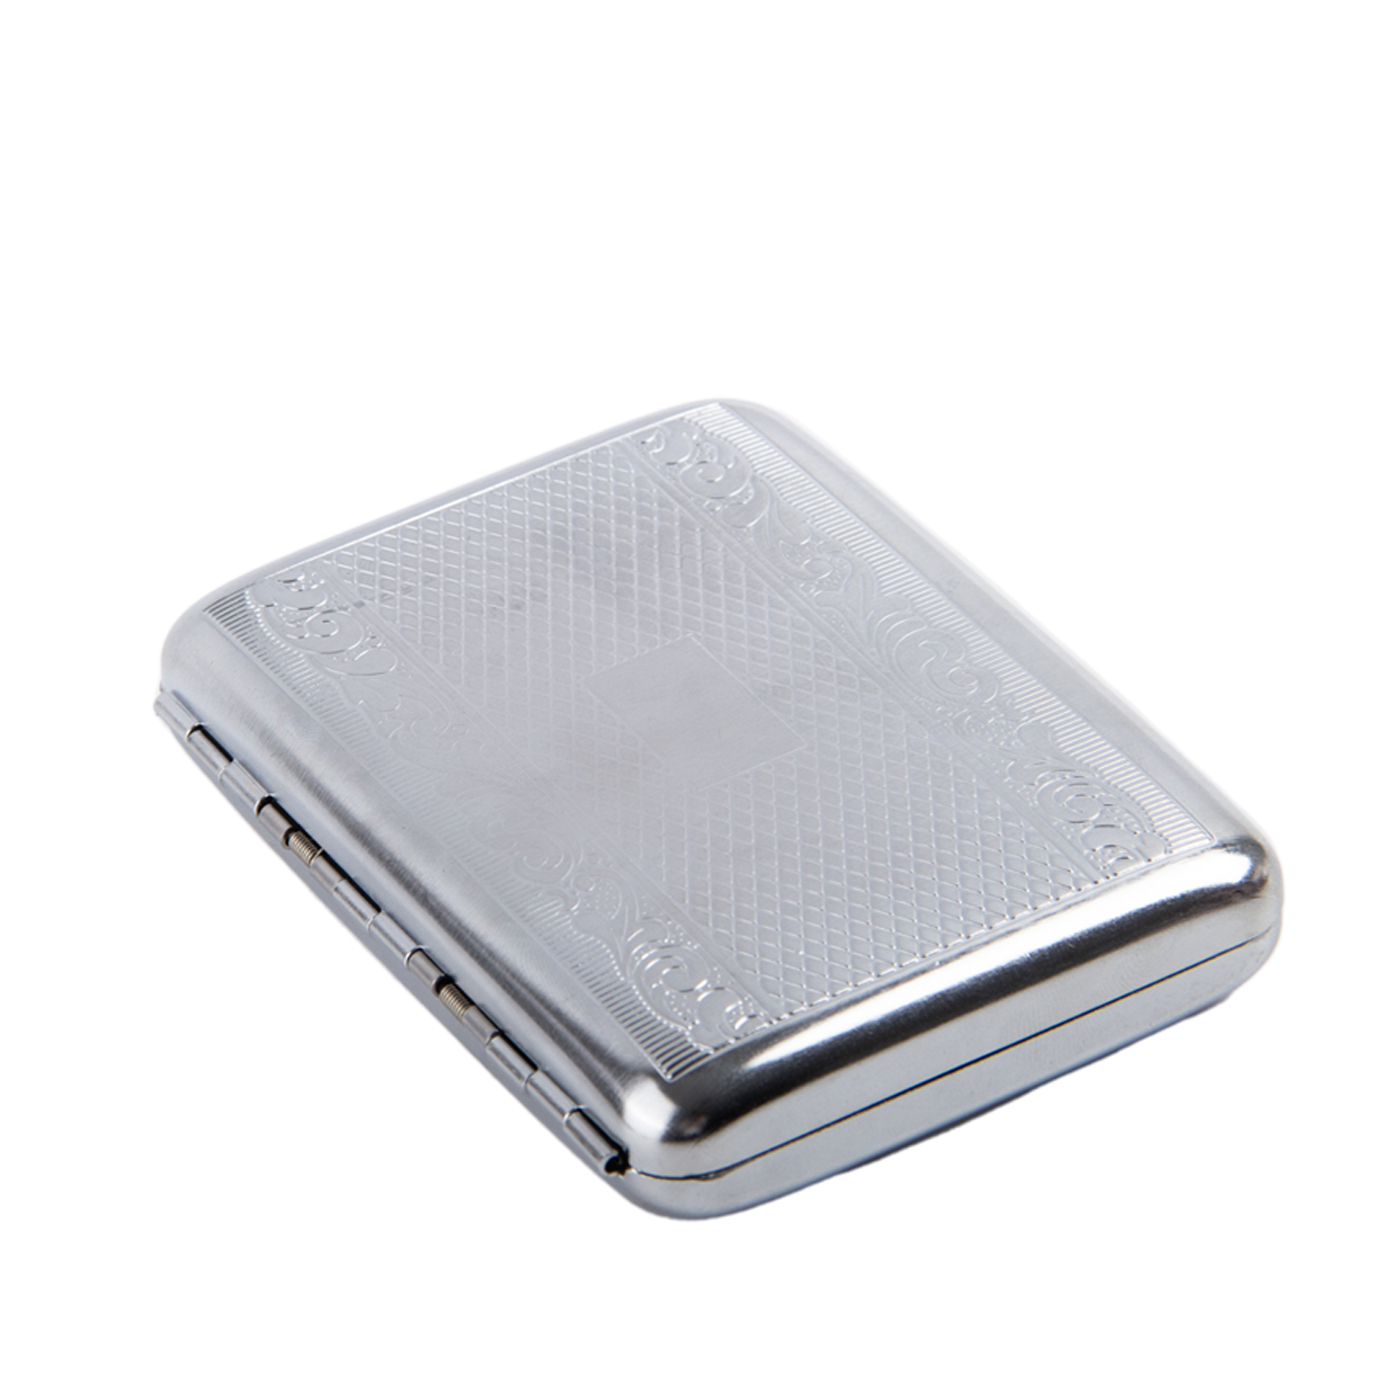 Stainless Steel Cigarette Case2